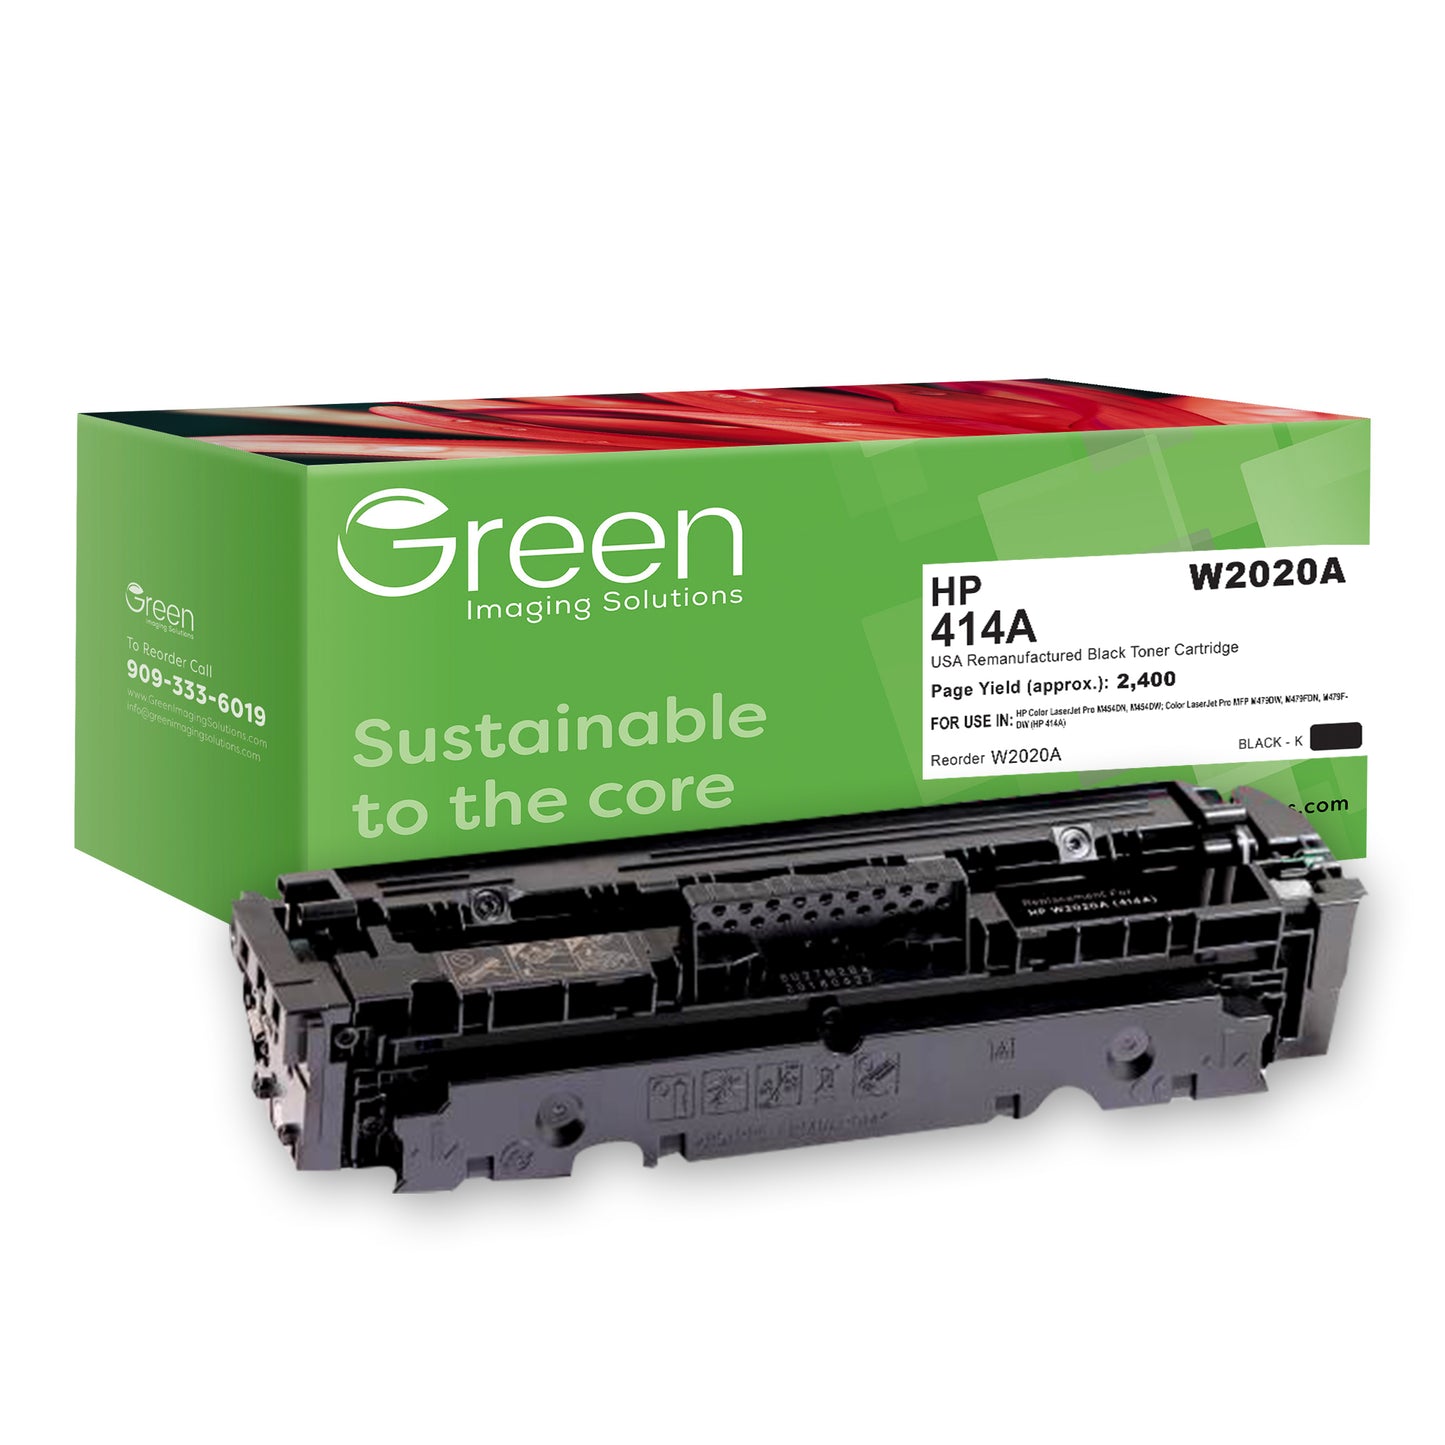 GIS USA Remanufactured Black Toner Cartridge for HP W2020A (HP 414A)